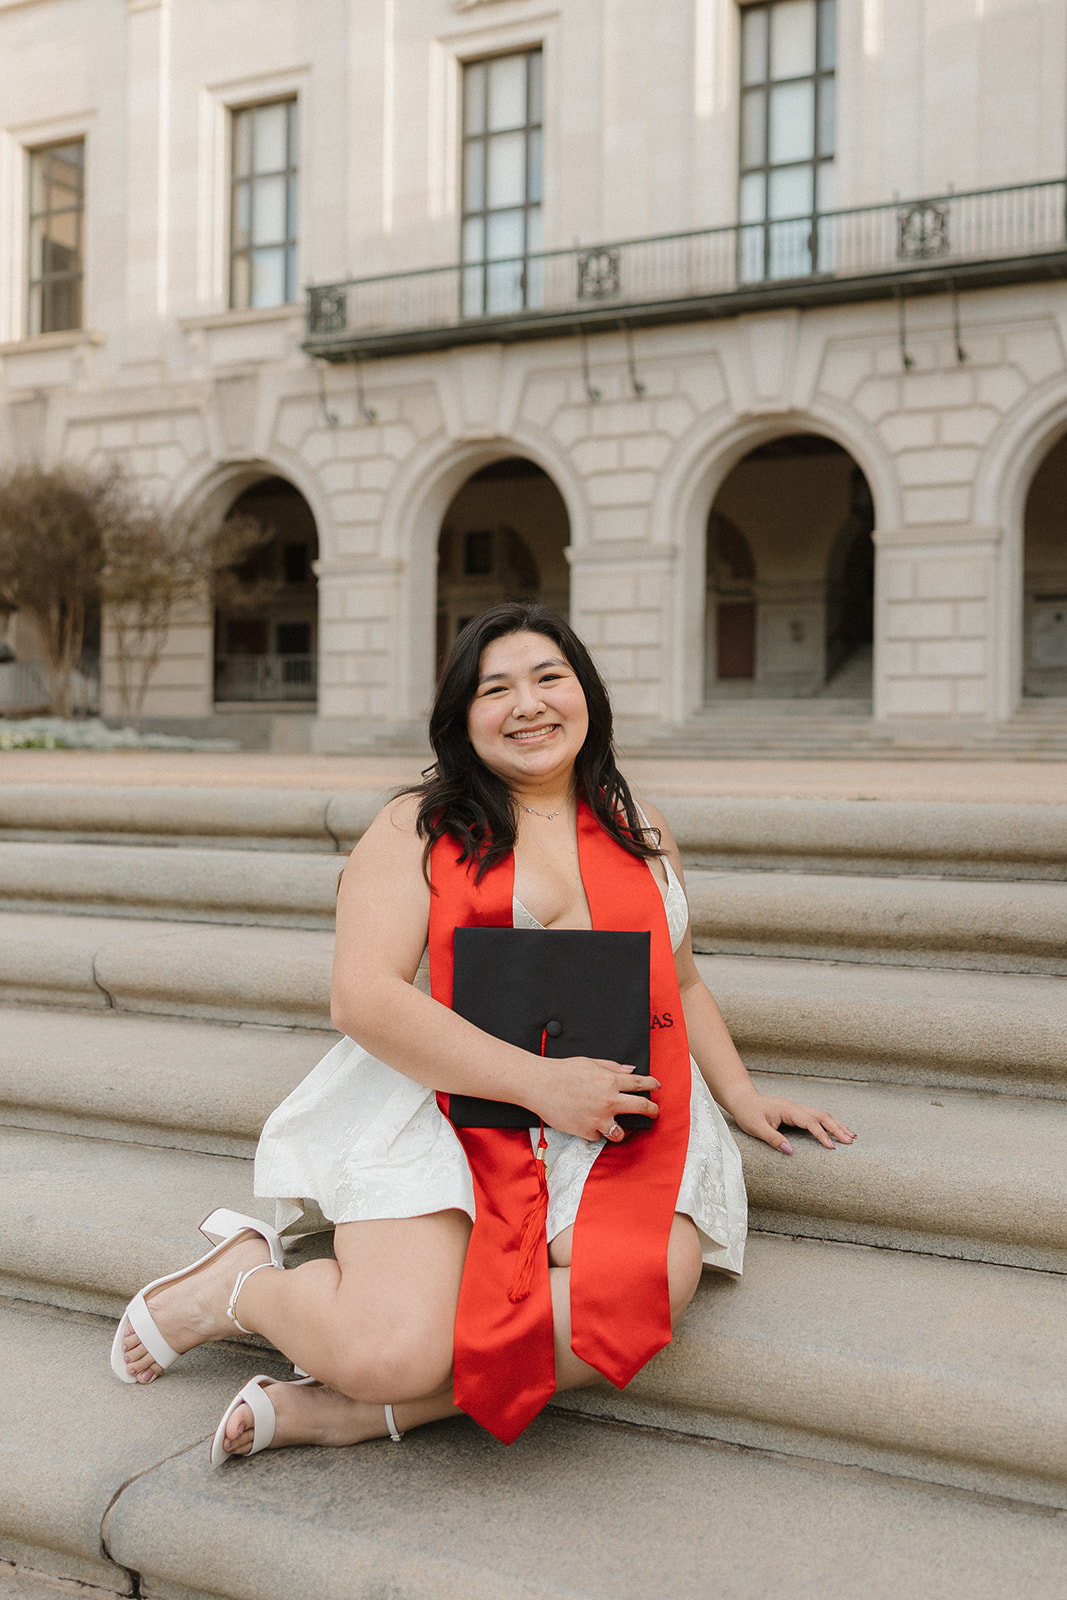 UT Austin senior pictures on the steps in front of the tower girl holding graduation cap